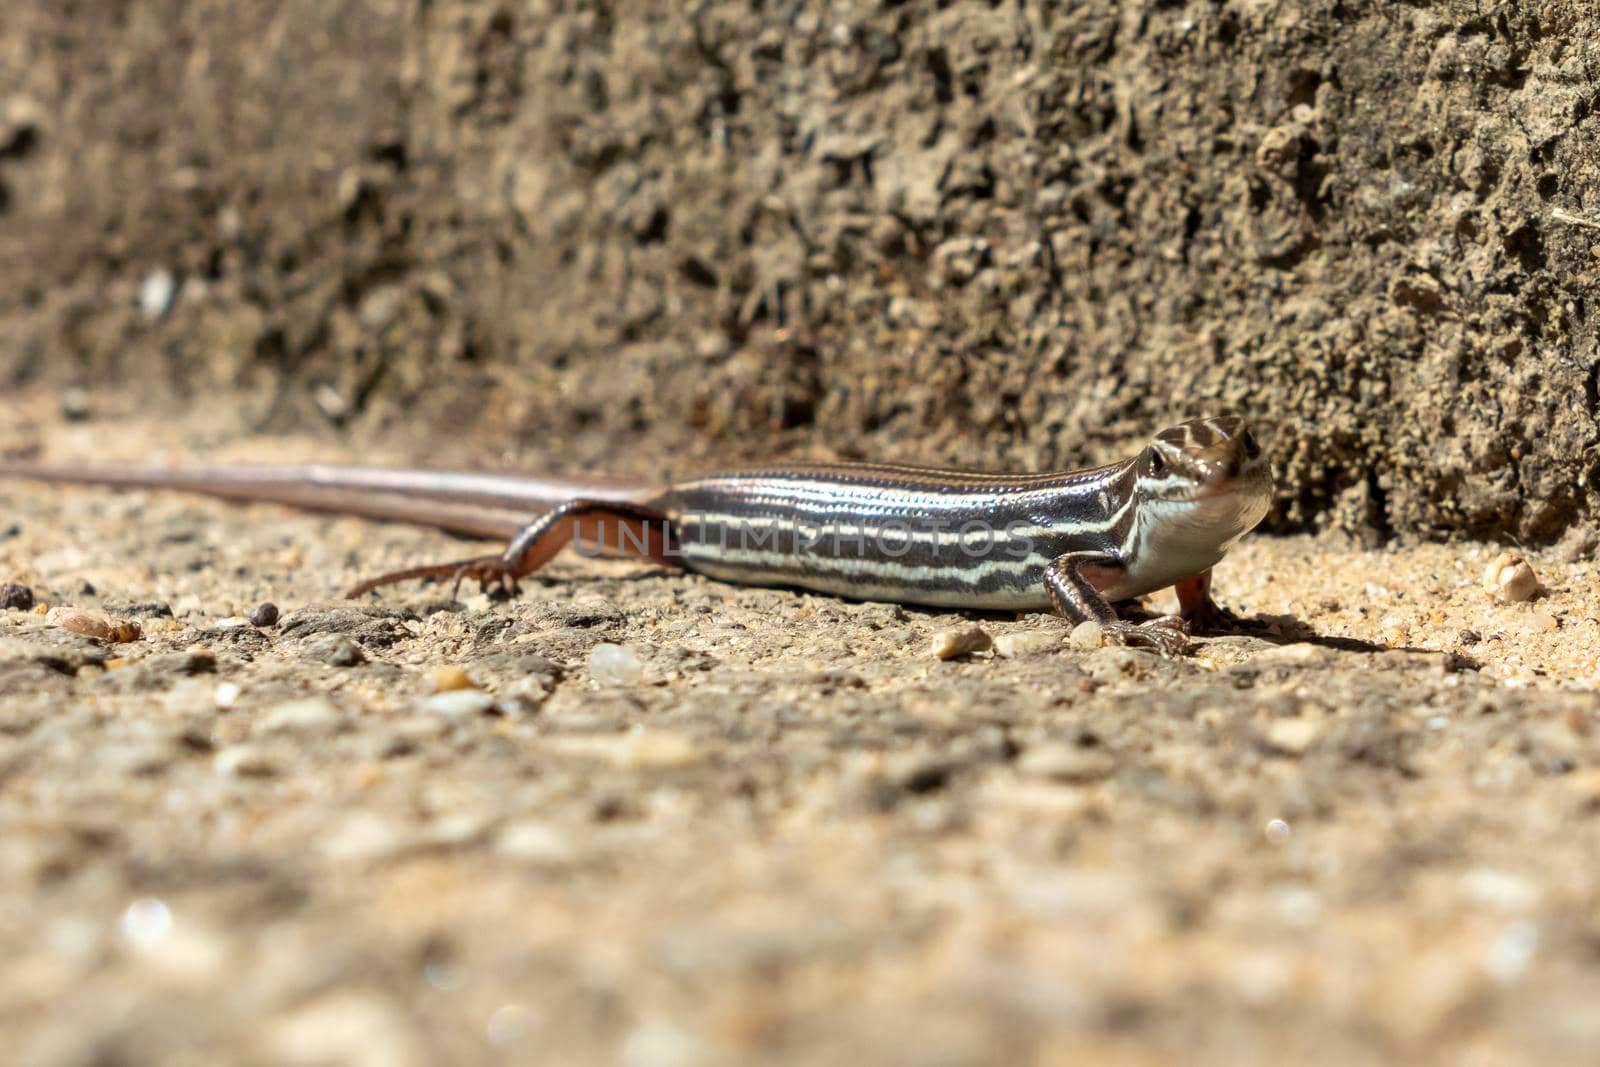 A small brown lizard standing in the sunshine in The Blue Mountains in regional New South Wales in Australia